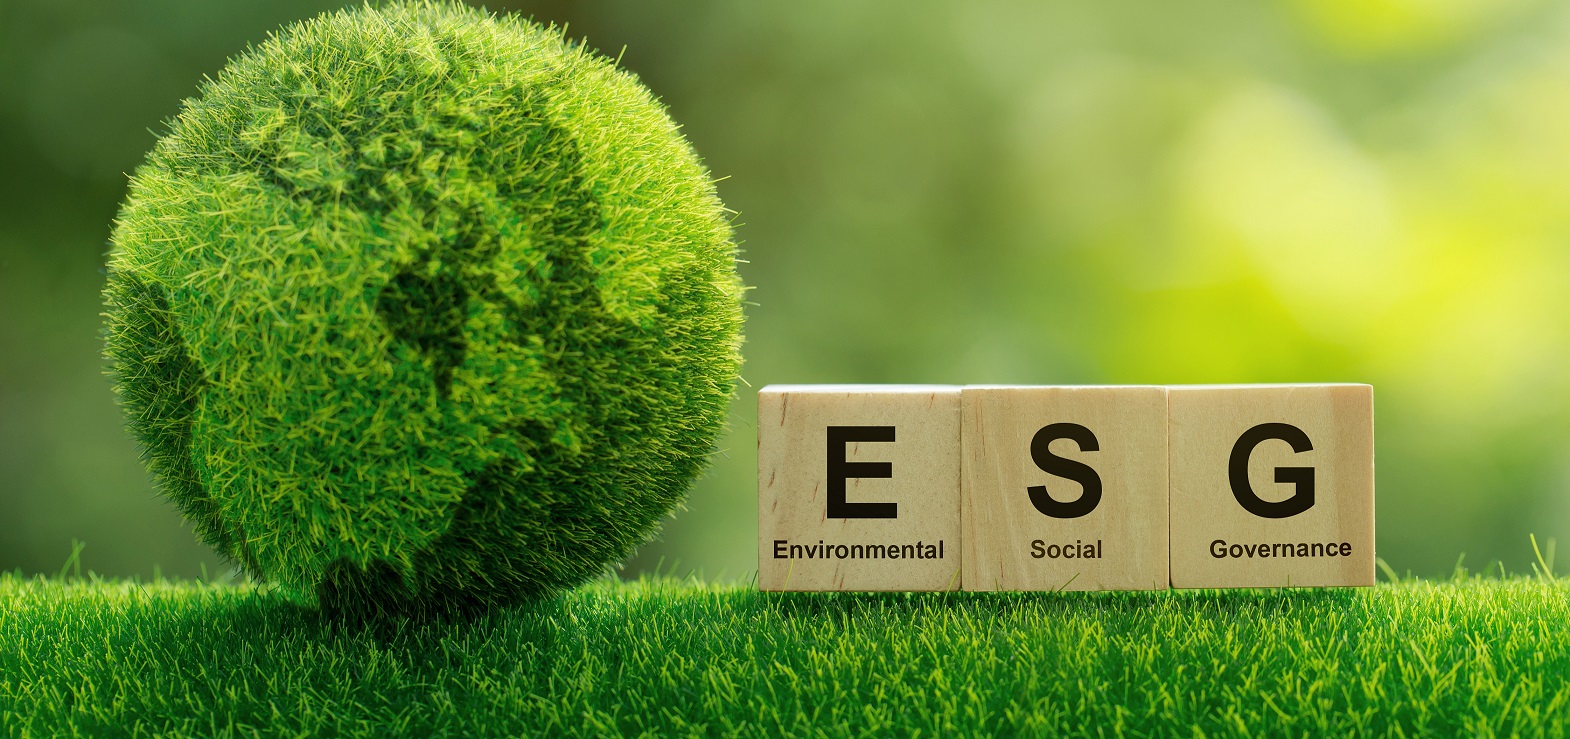 Why is ESG important? Why should companies and investors care?